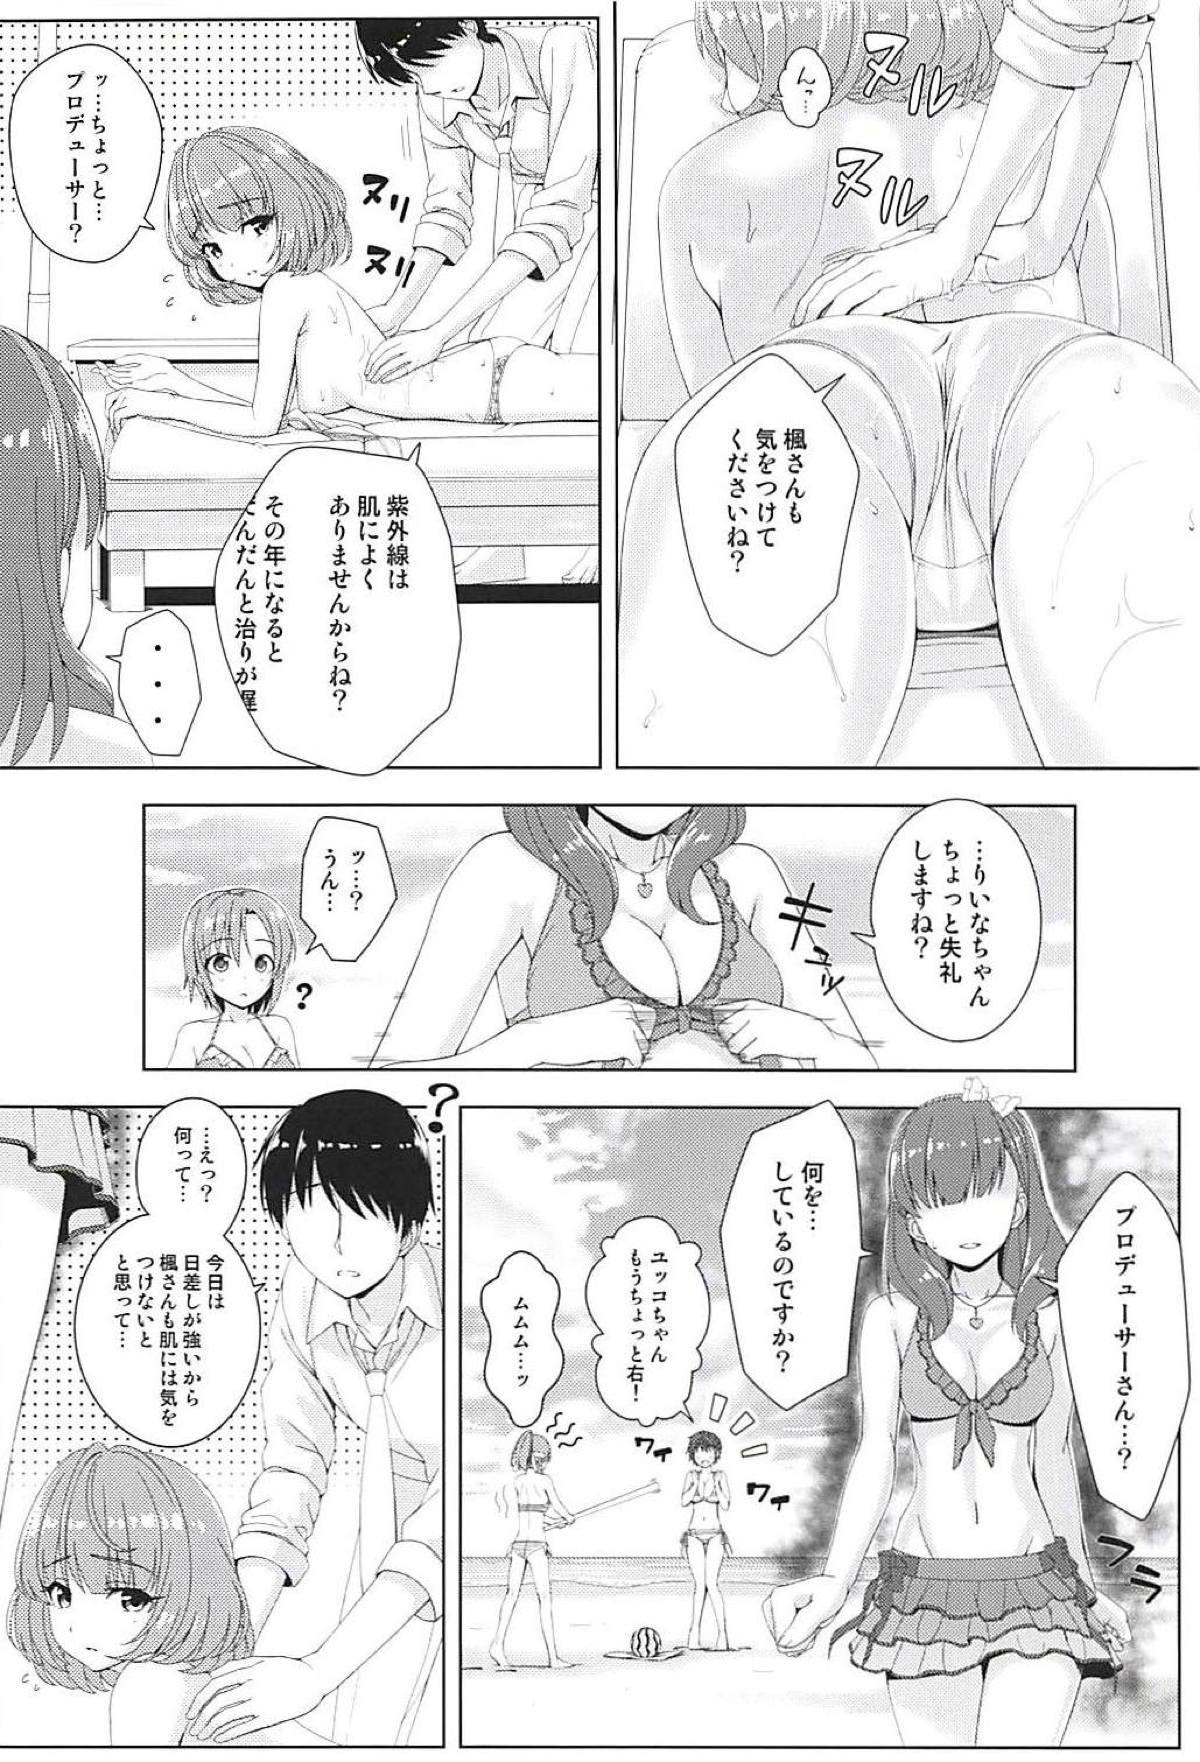 Doggystyle Porn BAD COMMUNICATION? vol. 23 - The idolmaster Shaved - Page 11